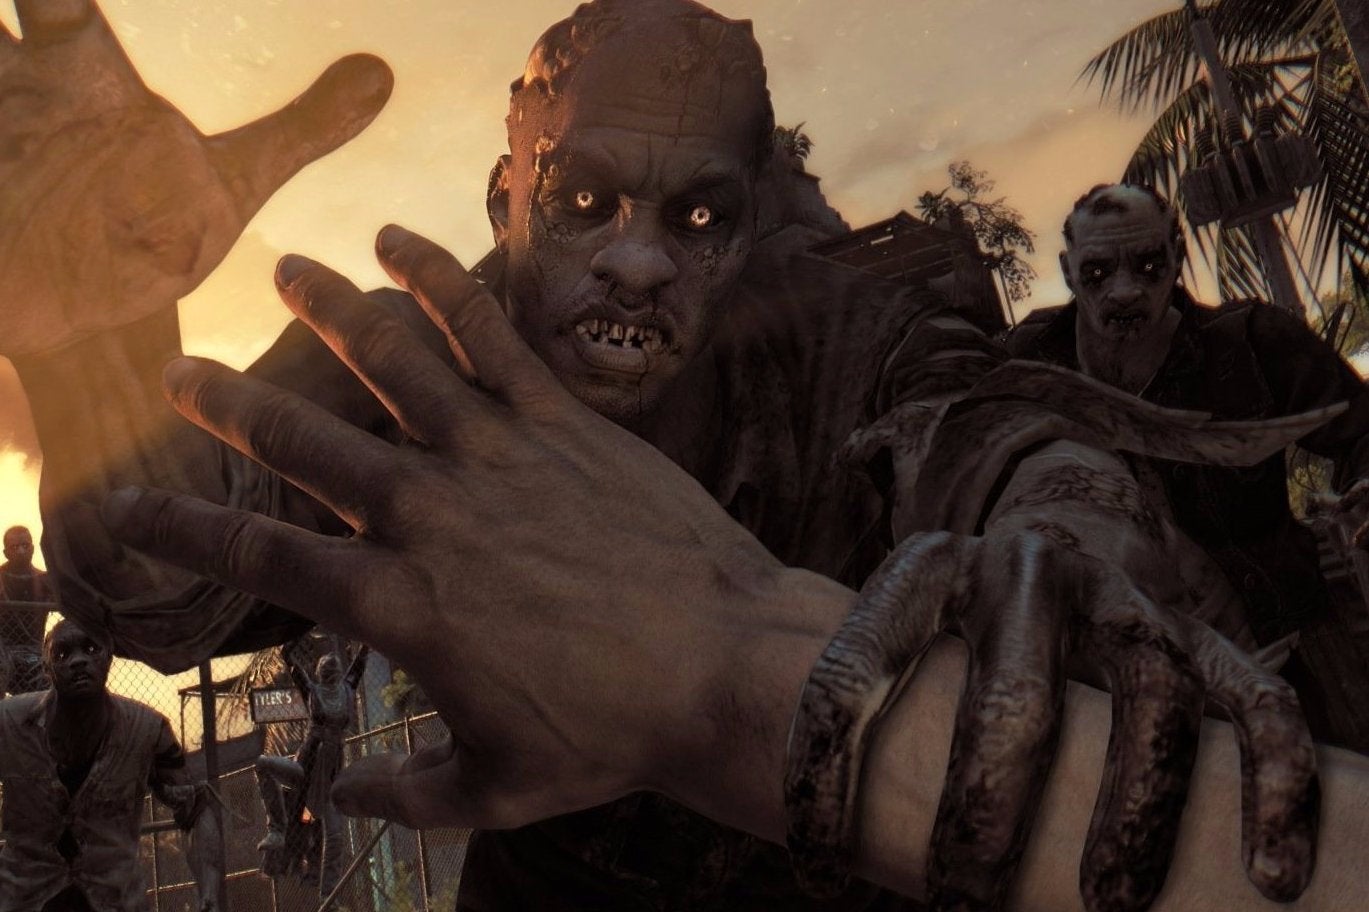 Image for Physical Dying Light sales overtake The Order and Evolve in UK